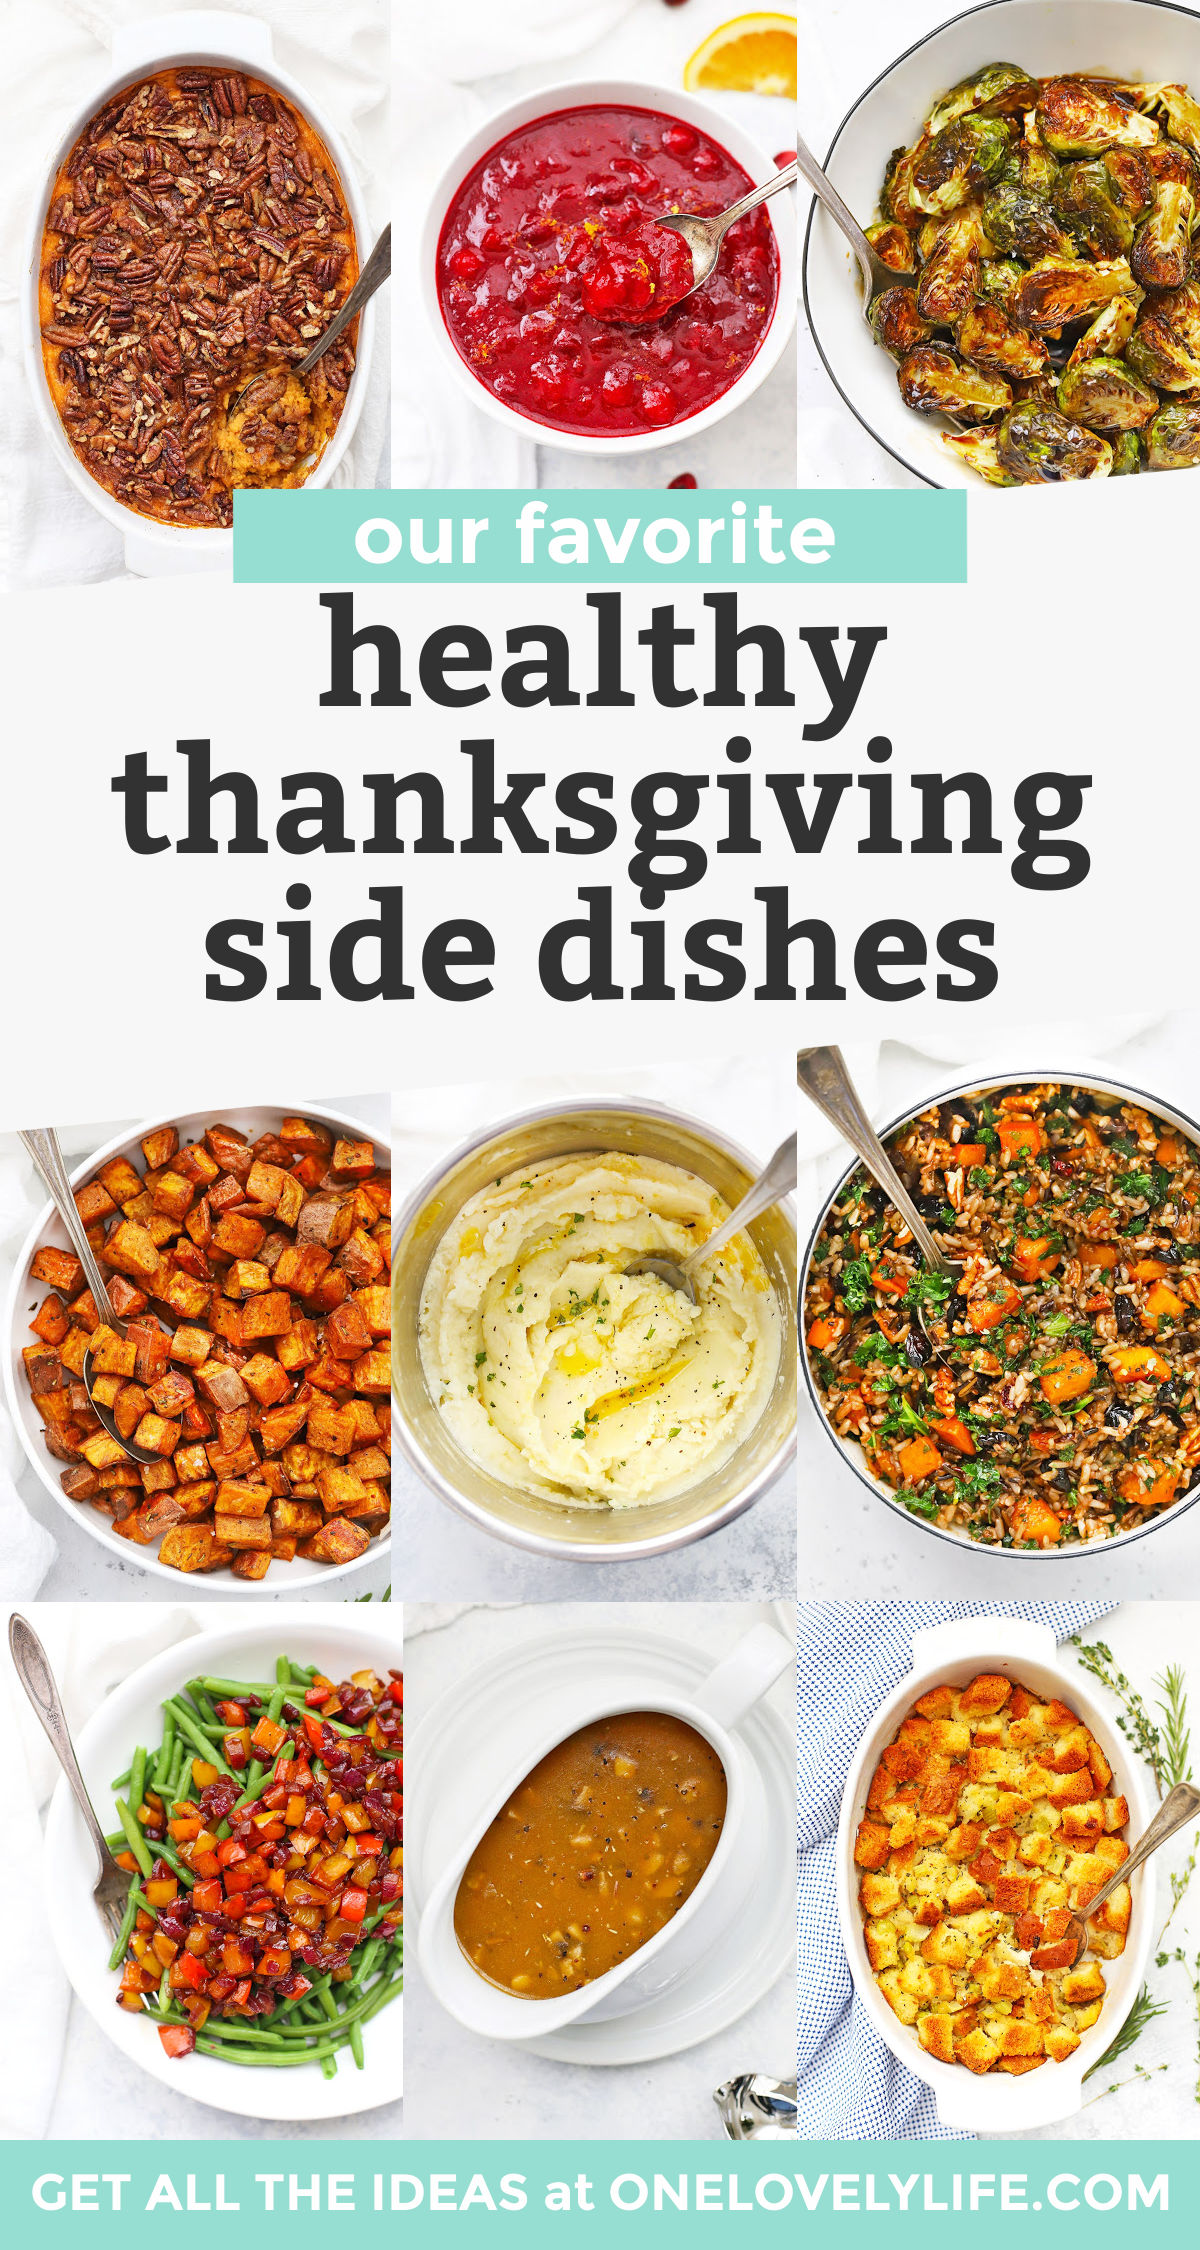 Collage of images of healthy thanksgiving side dishes on a white background with text overlay that reads "Our Favorite Healthy Thanksgiving Side Dishes"